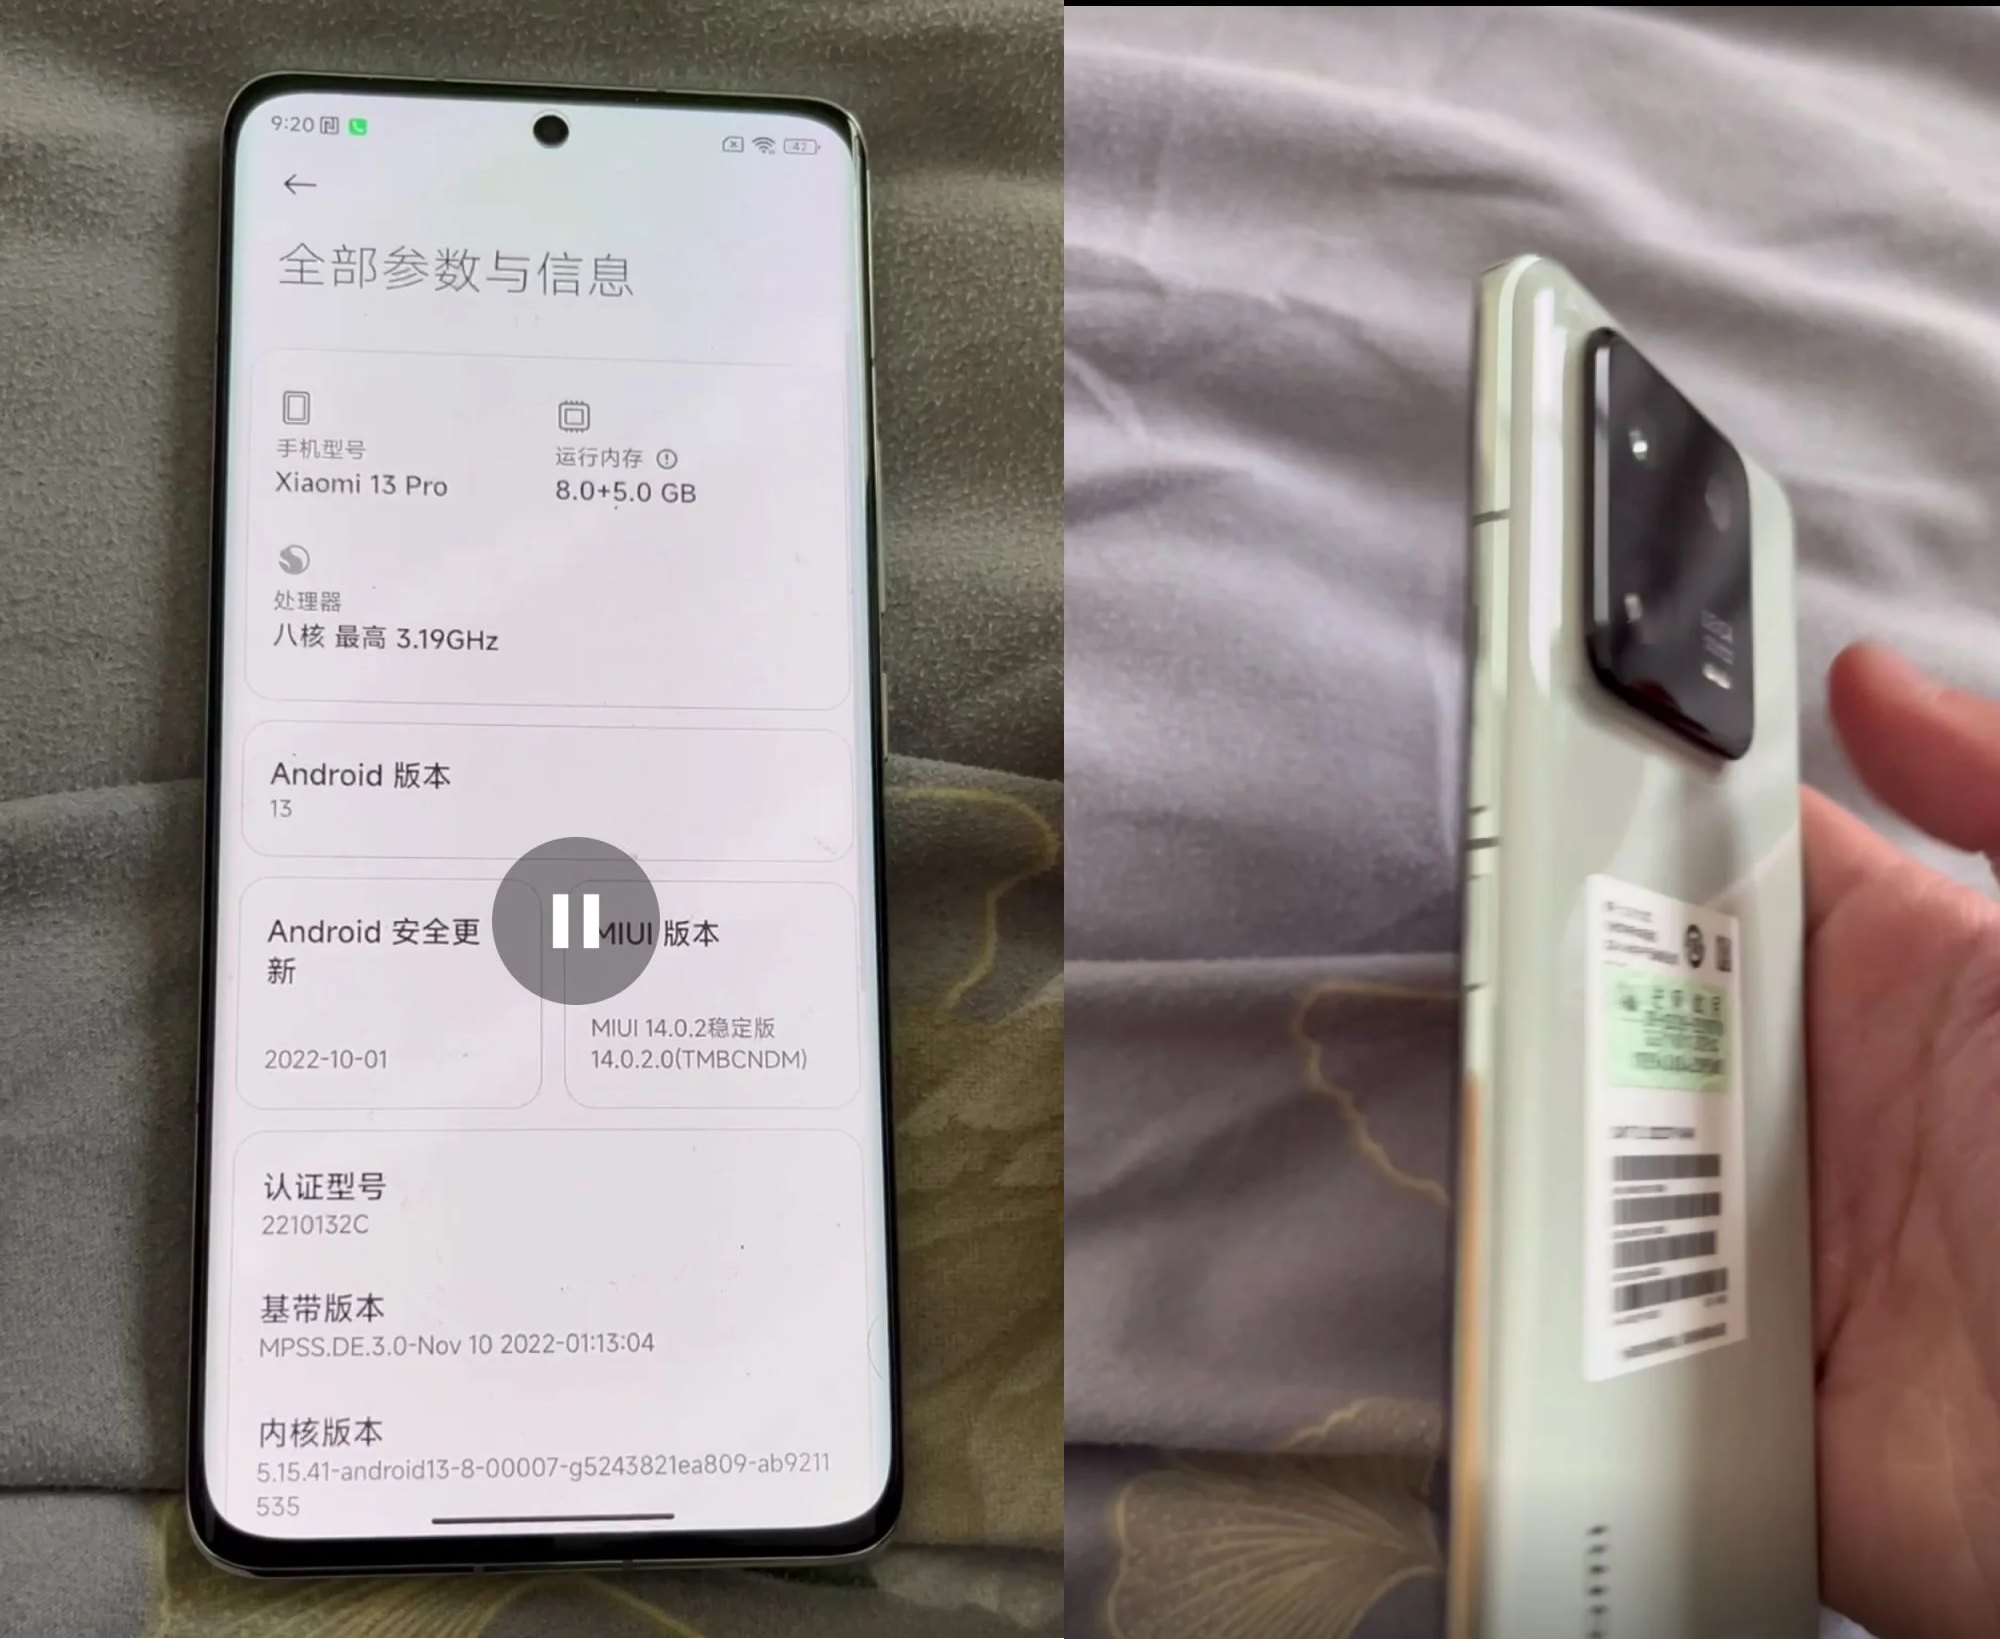 Xiaomi 13 Pro in the real world